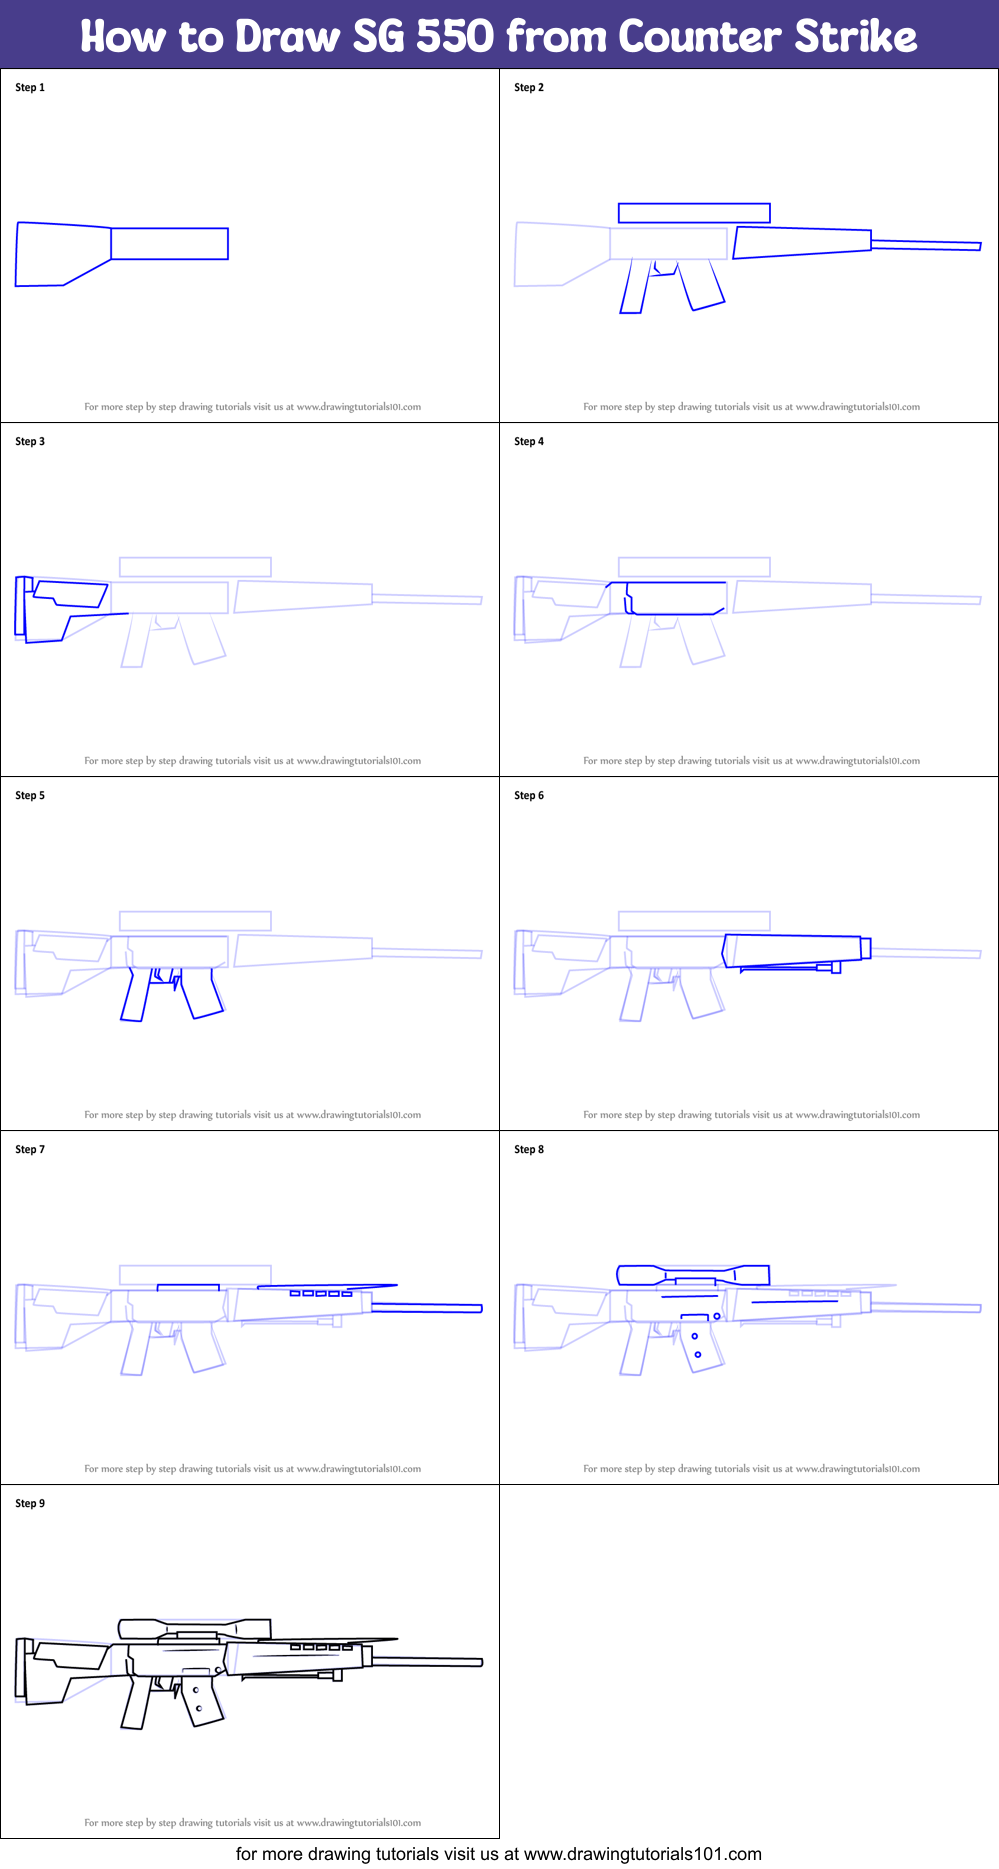 How to Draw SG 550 from Counter Strike printable step by step drawing